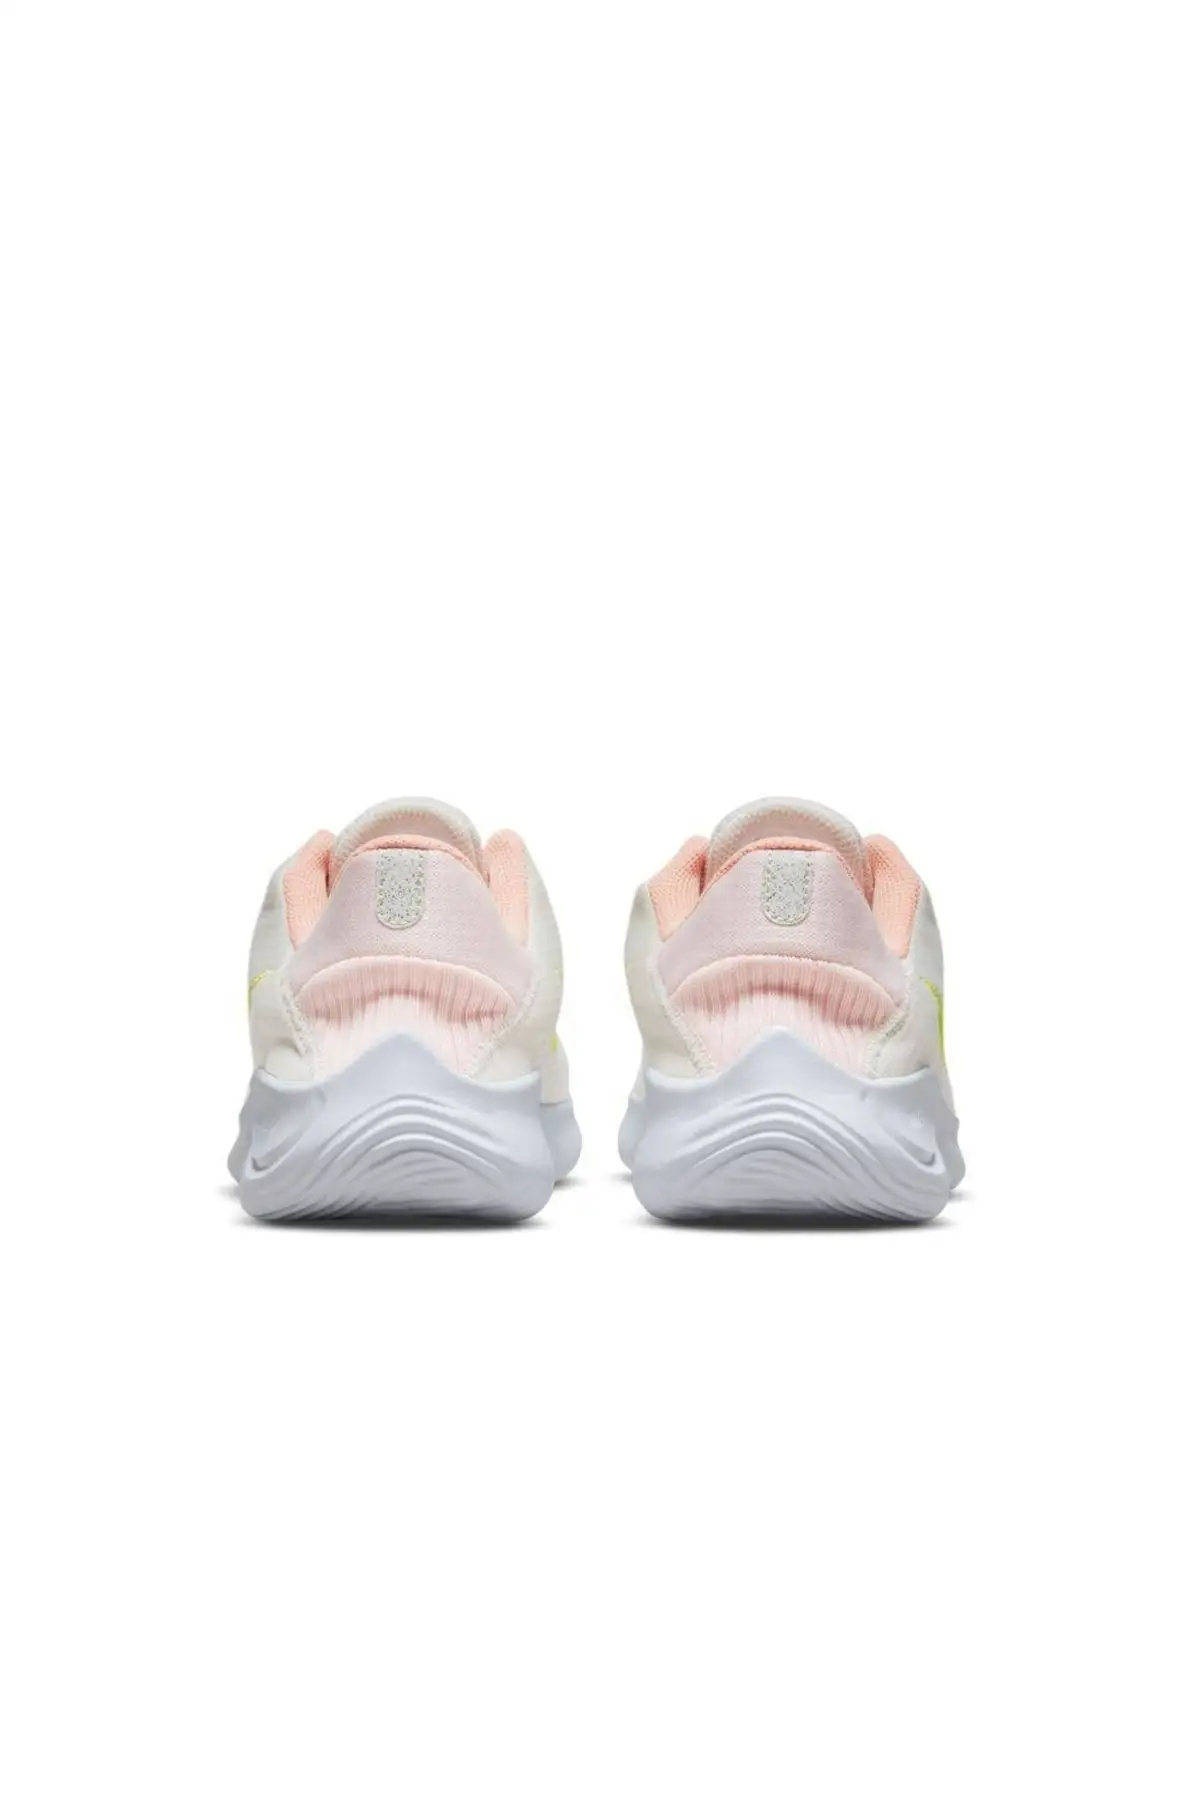 Unleash Your Potential with Women’s Nike Flex Shoes插图4